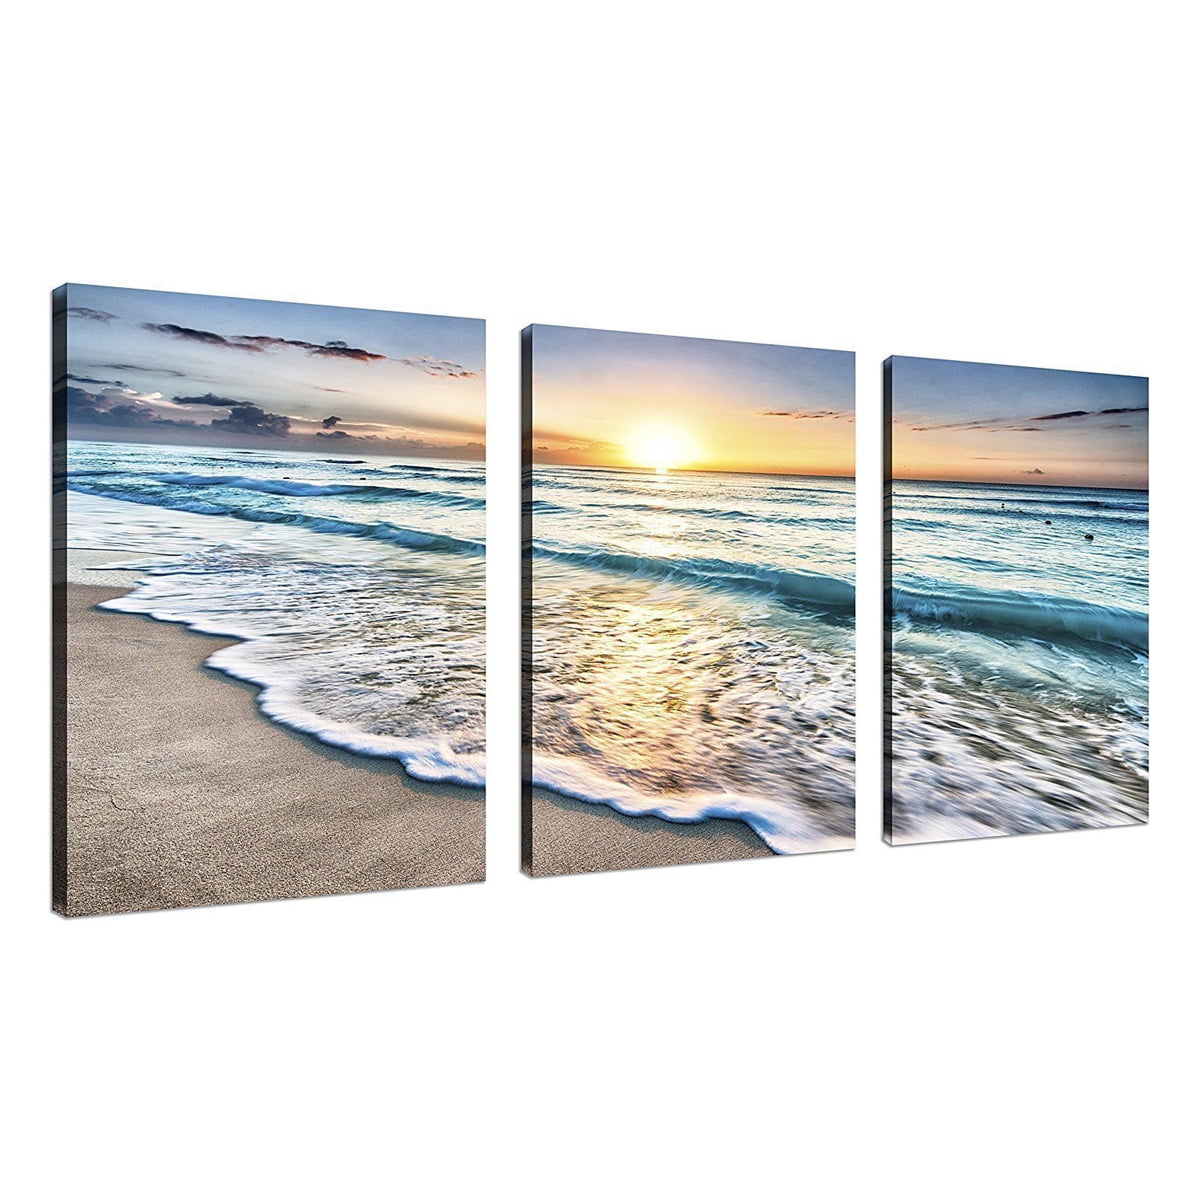 Wall Art Sunset Ocean Beach Canvas Prints Paintings Pictures Seascape Home Decor 